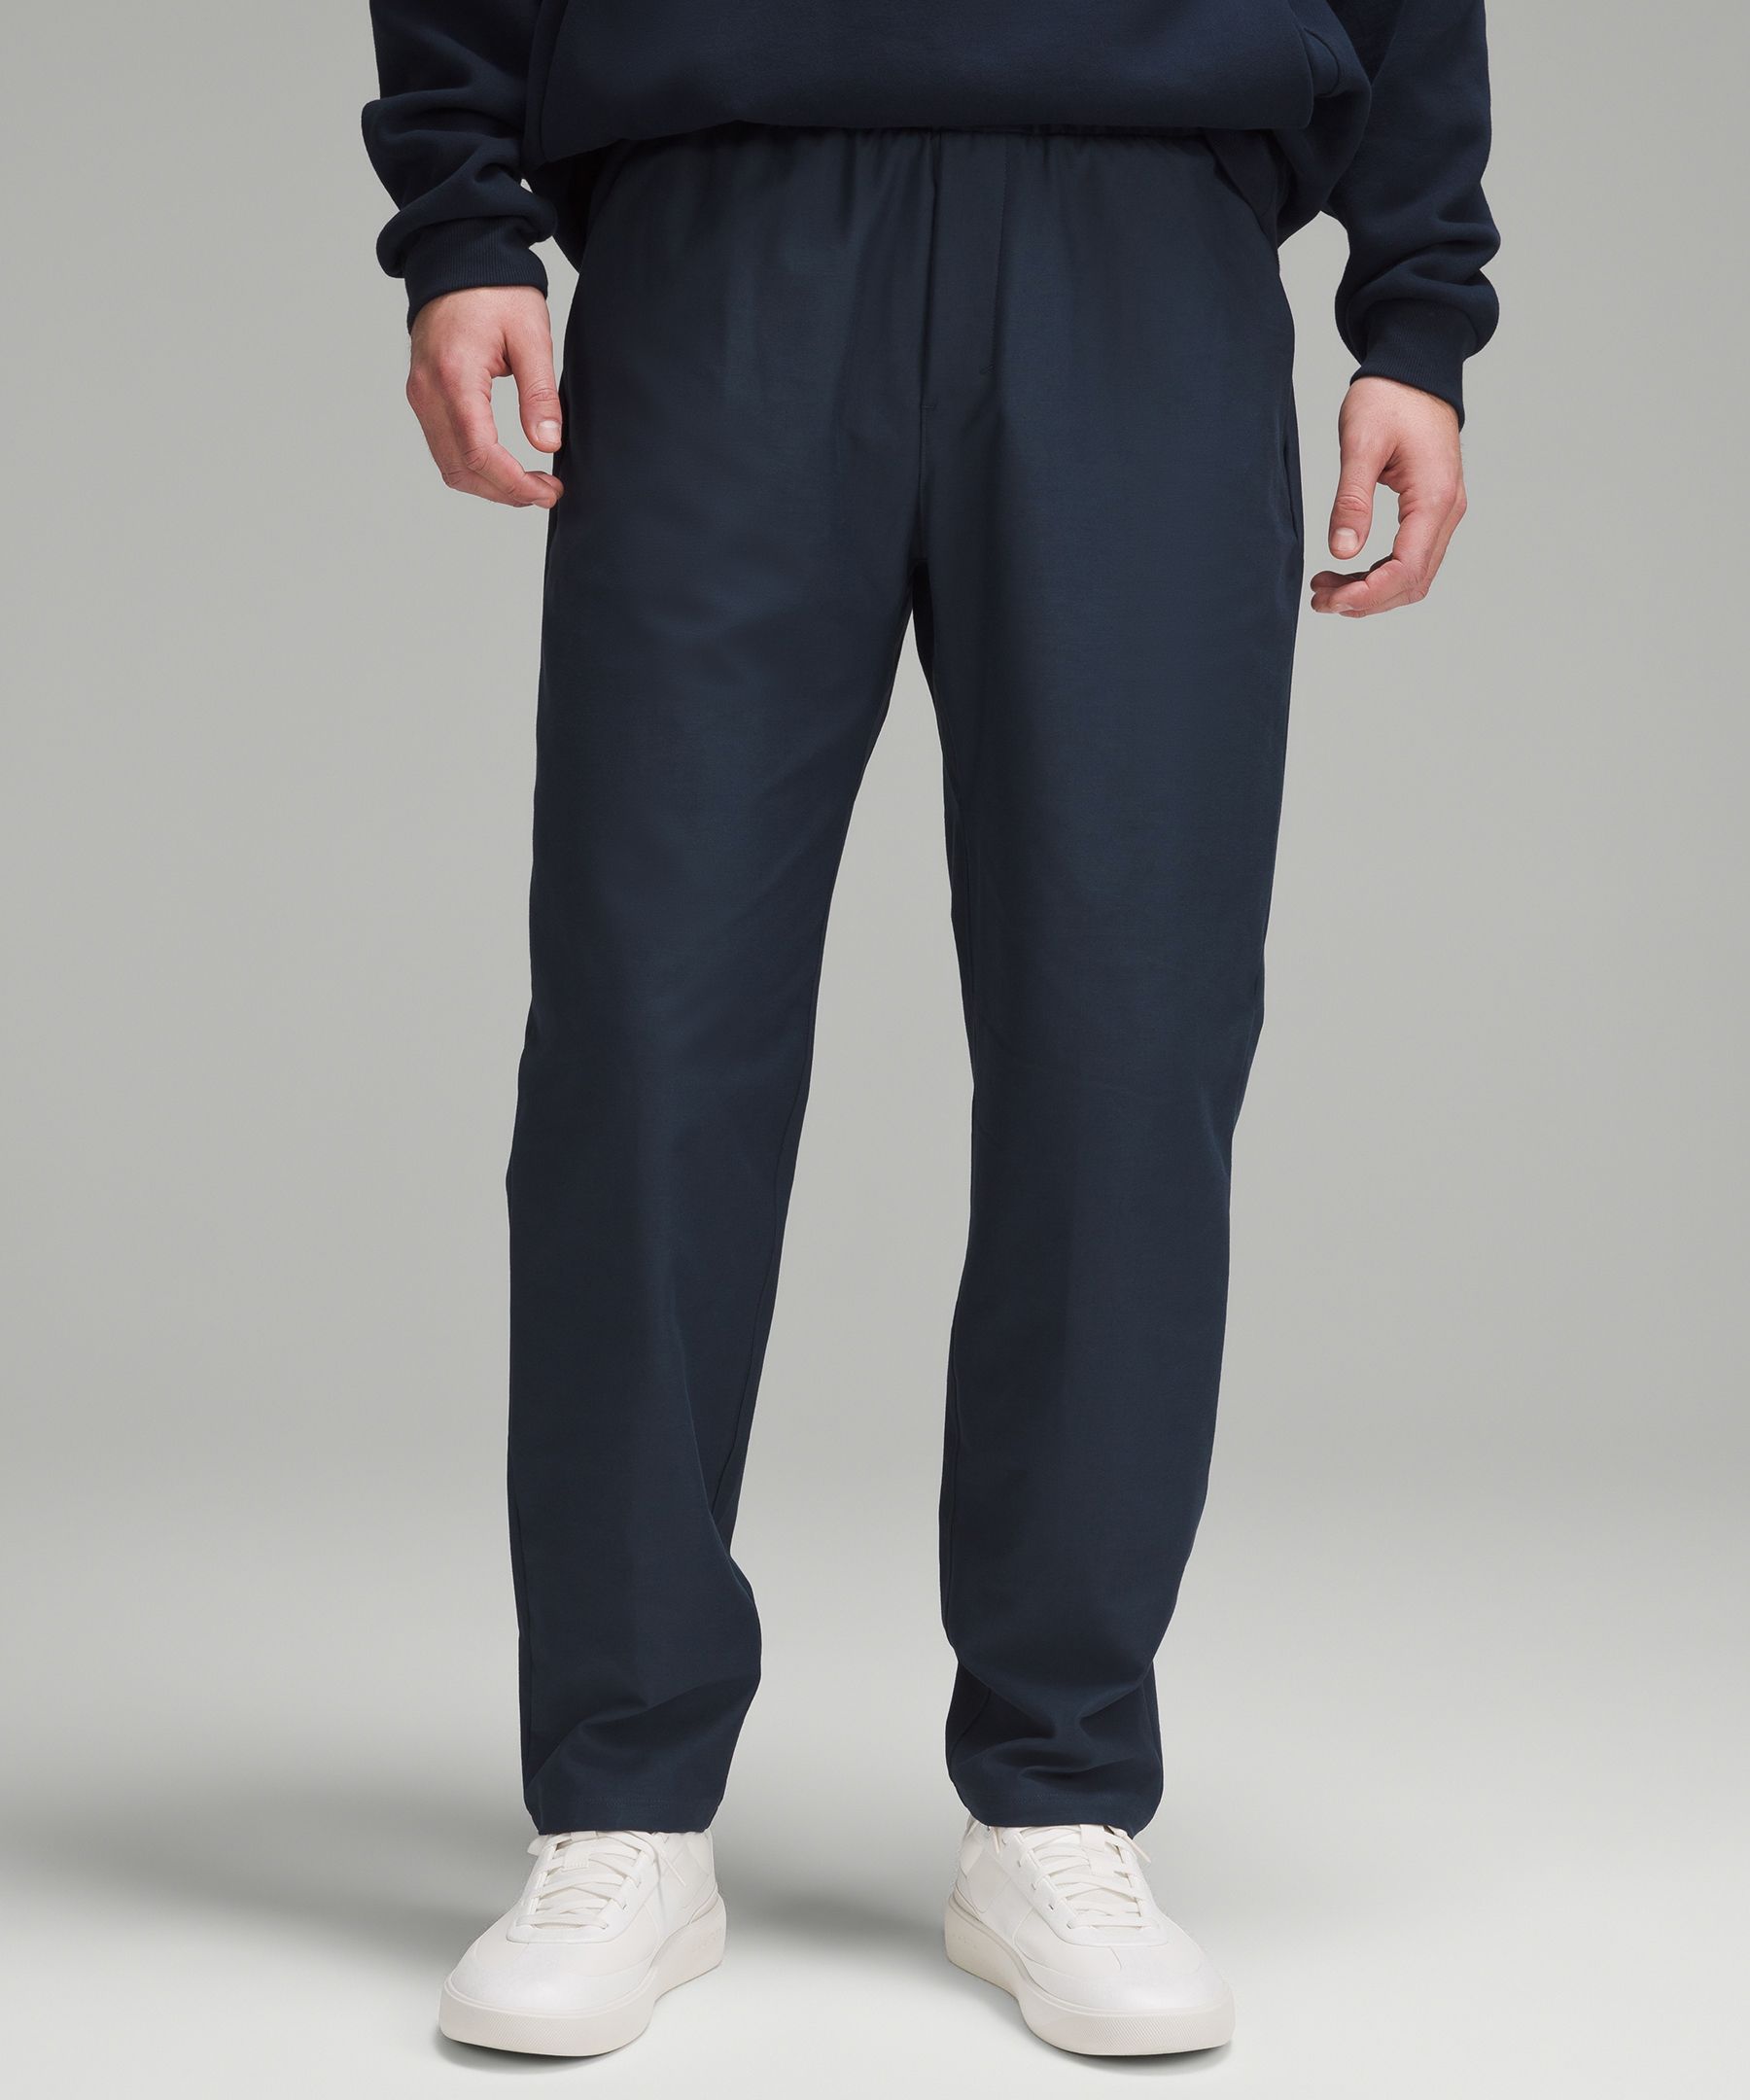 Utilitech Pull-On Relaxed-Fit Pant